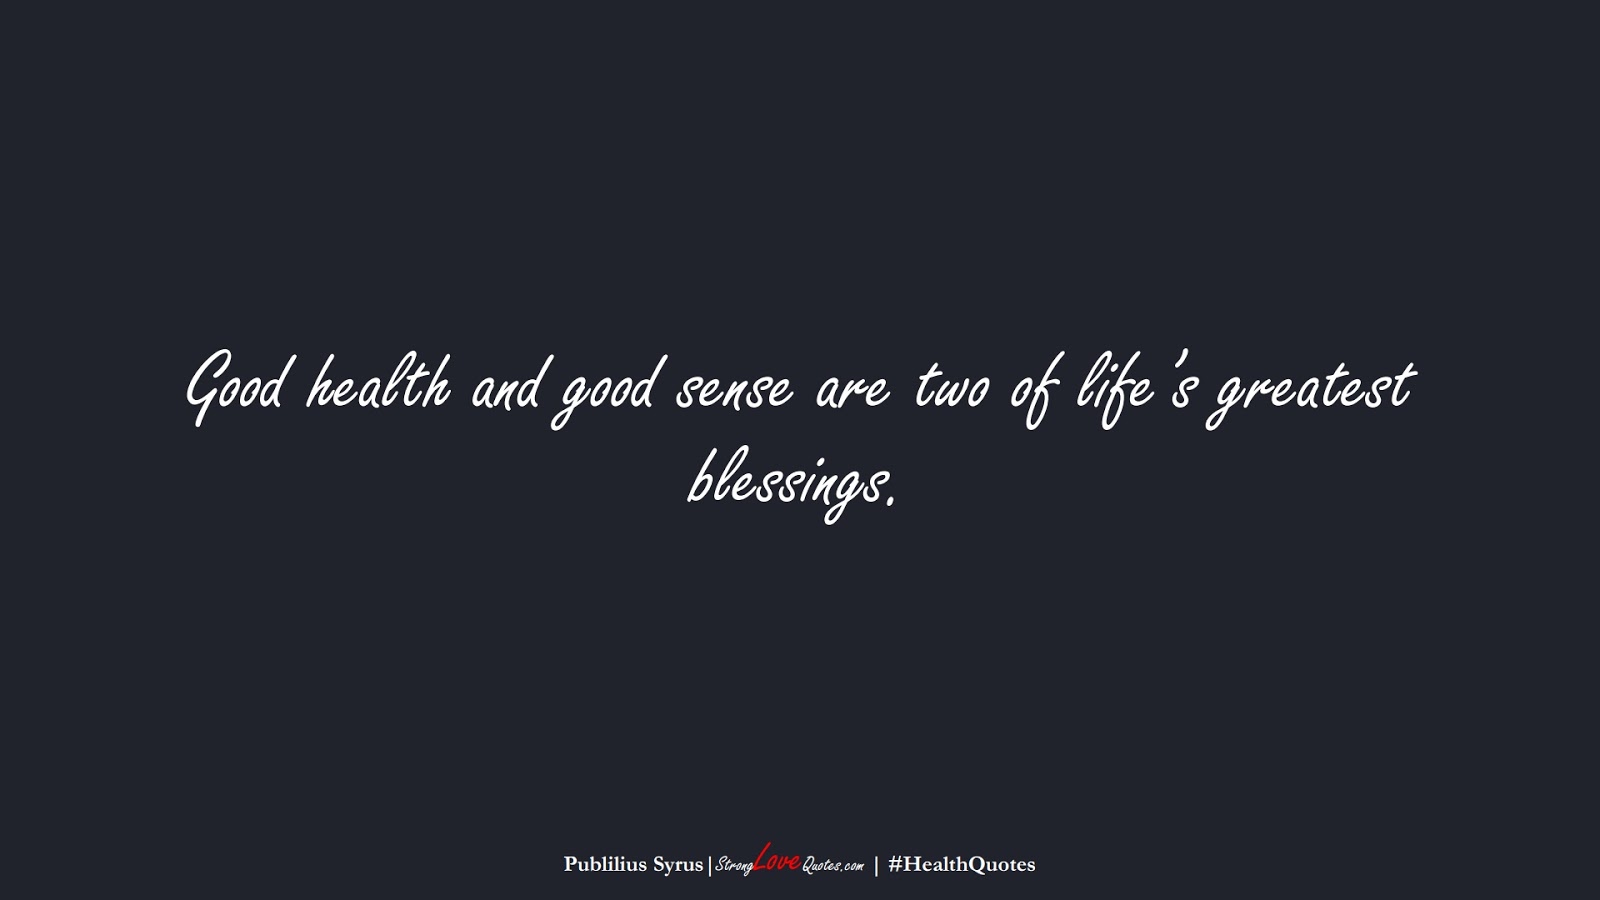 Good health and good sense are two of life’s greatest blessings. (Publilius Syrus);  #HealthQuotes